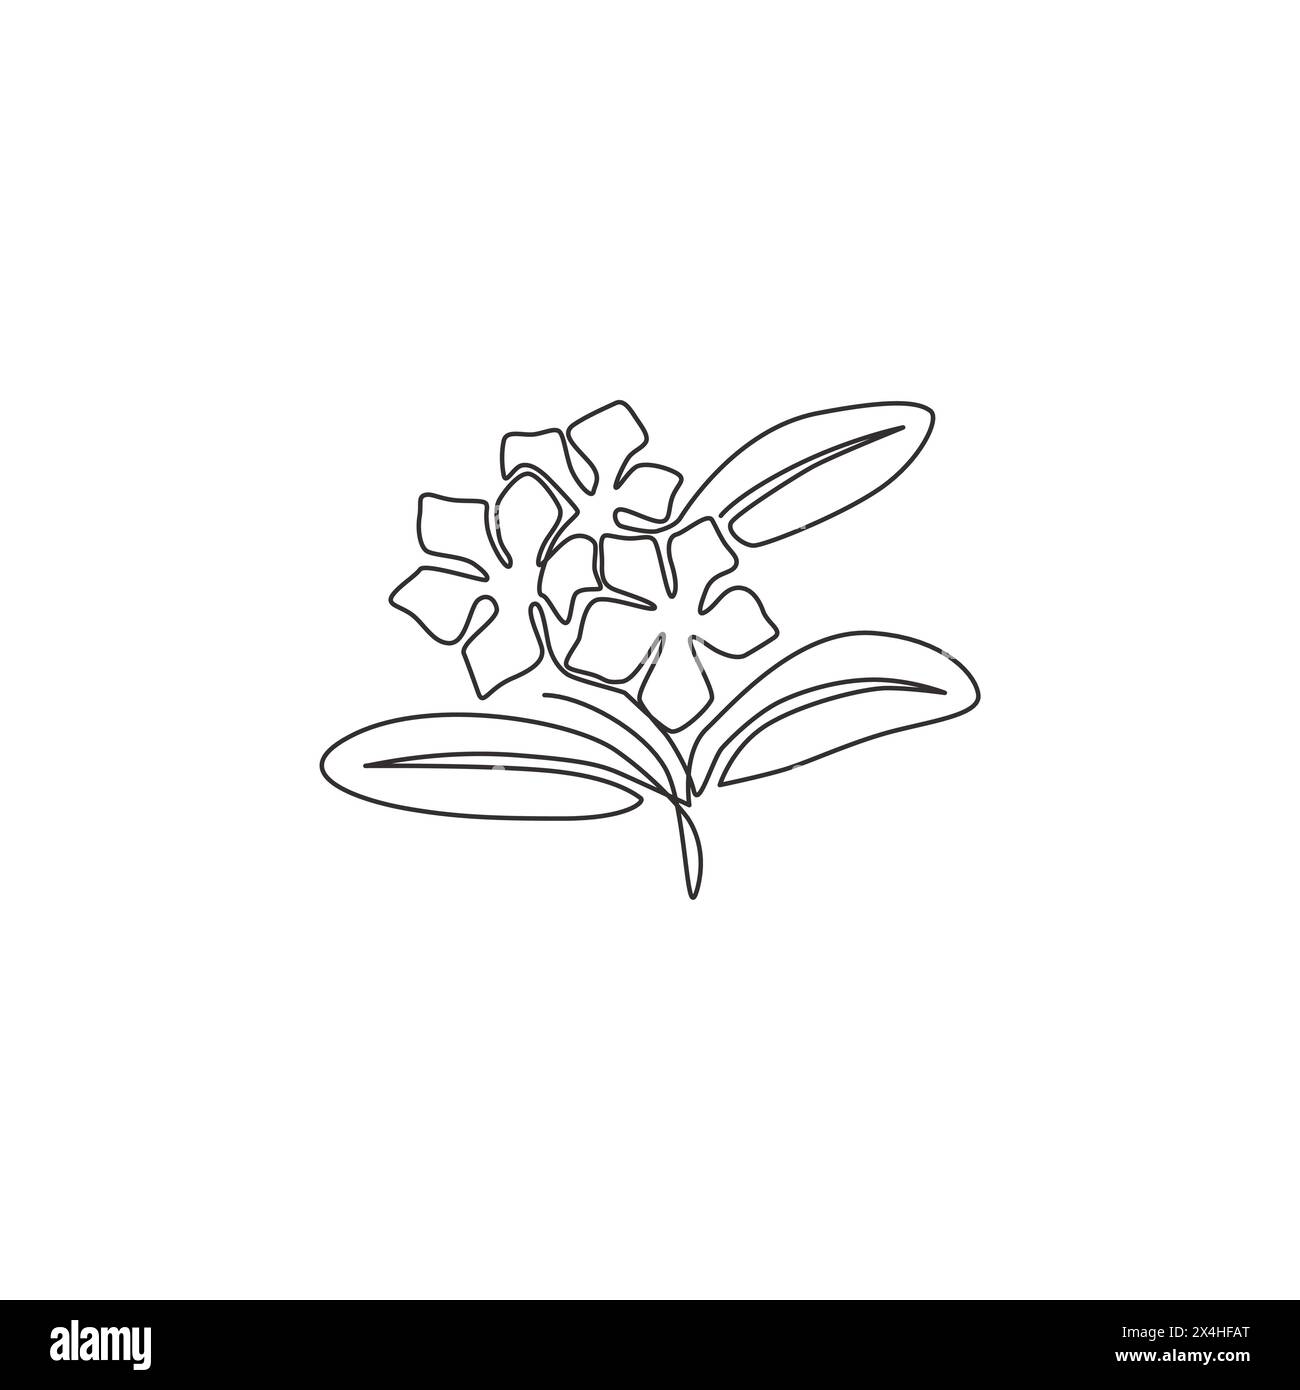 Single continuous line drawing of beauty fresh vinca for home wall art decor poster. Printable decorative periwinkle flower for greeting card ornament Stock Vector